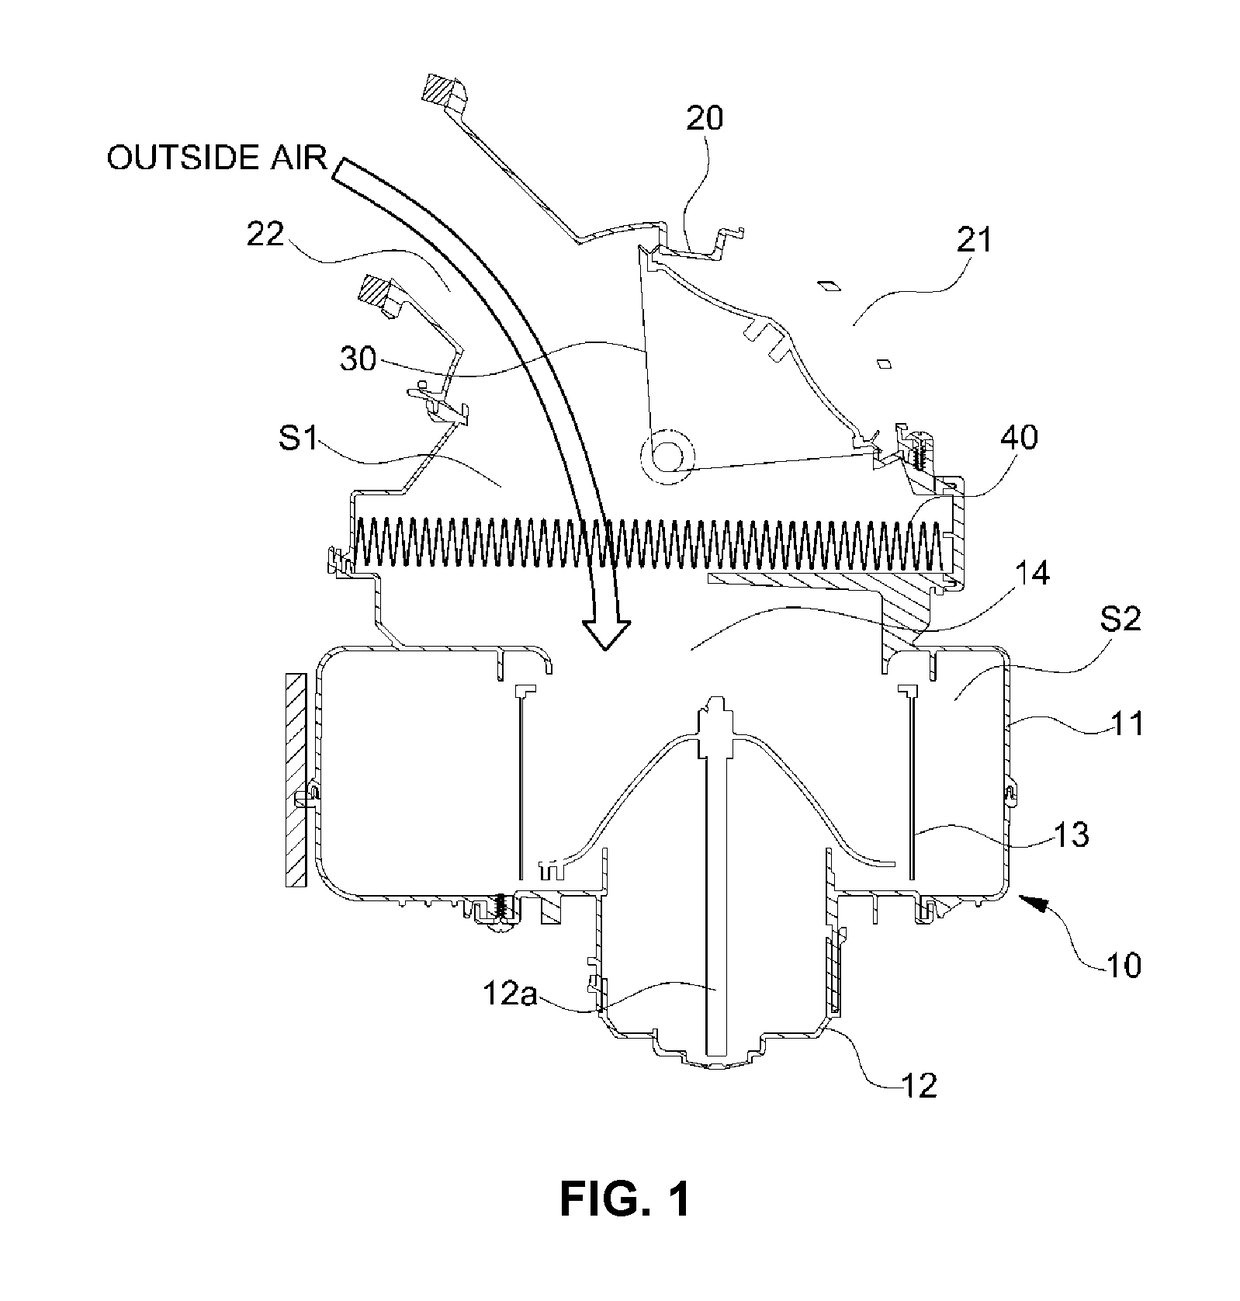 Vehicle air conditioning system for separately controlling flow of inside/outside air